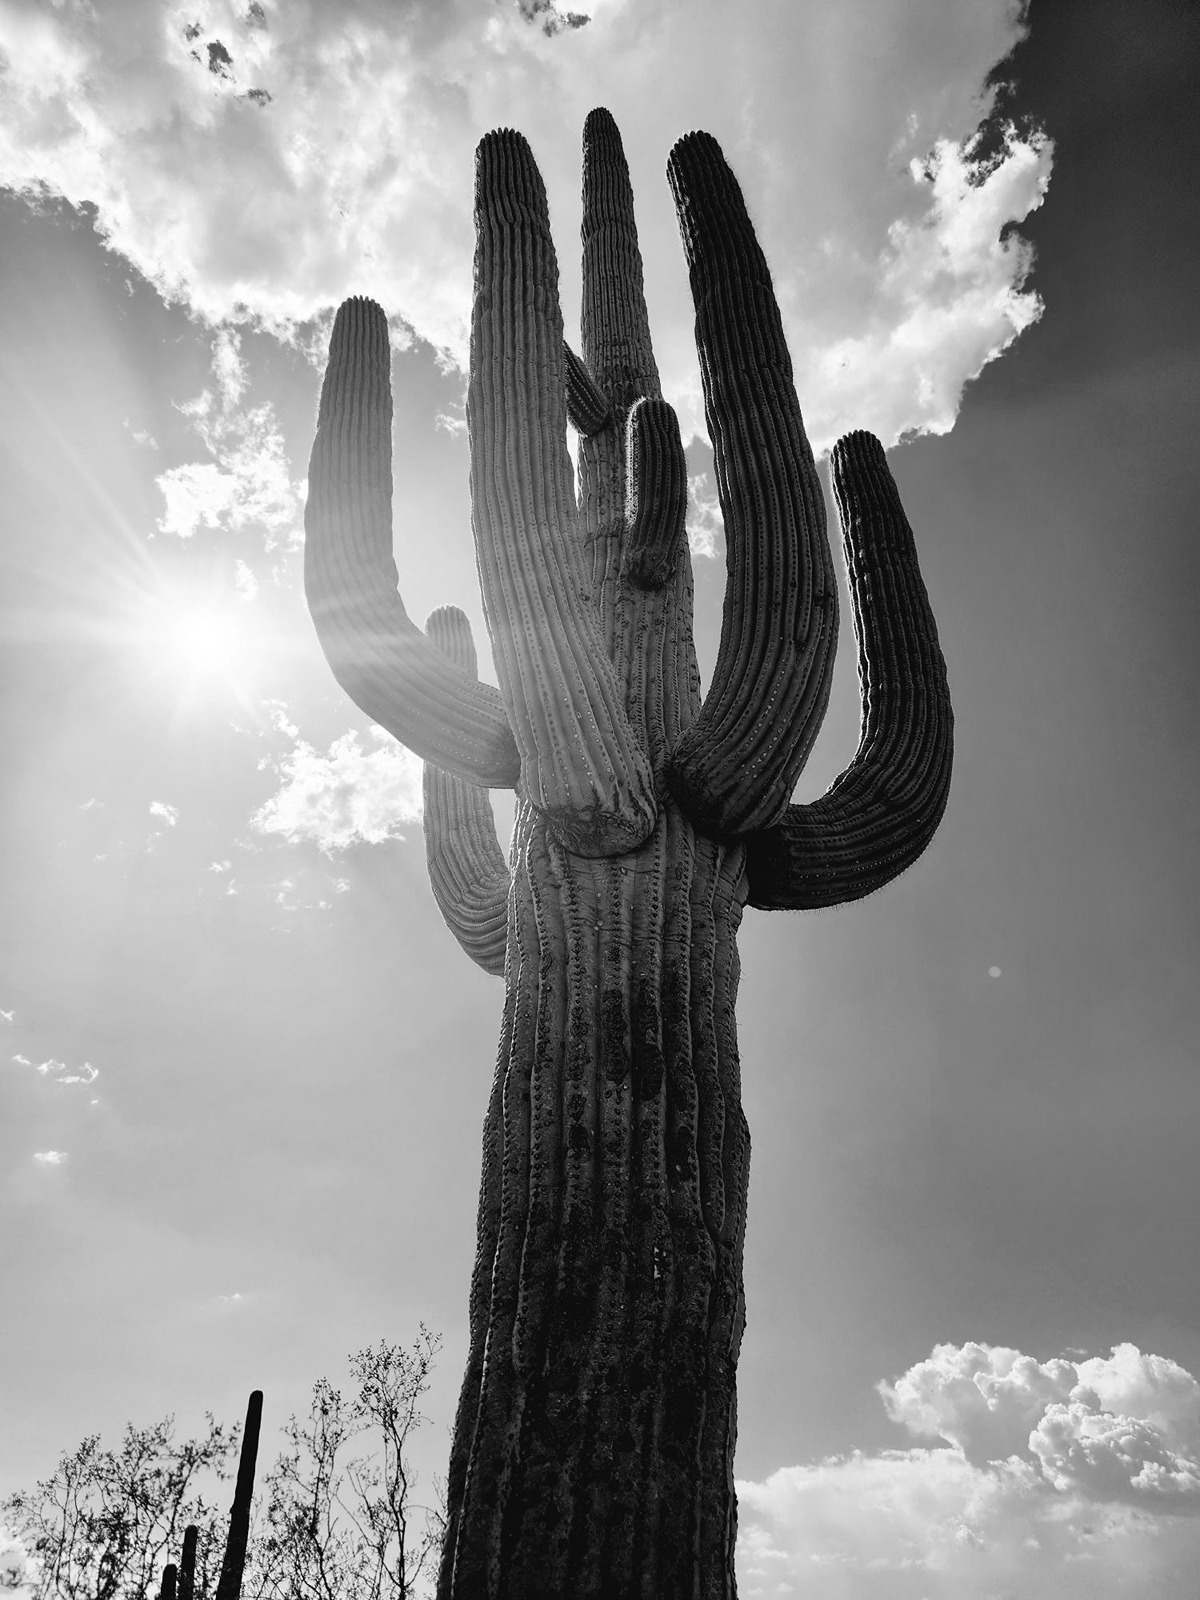 An artsy black and white image of a Saguaro Cactus